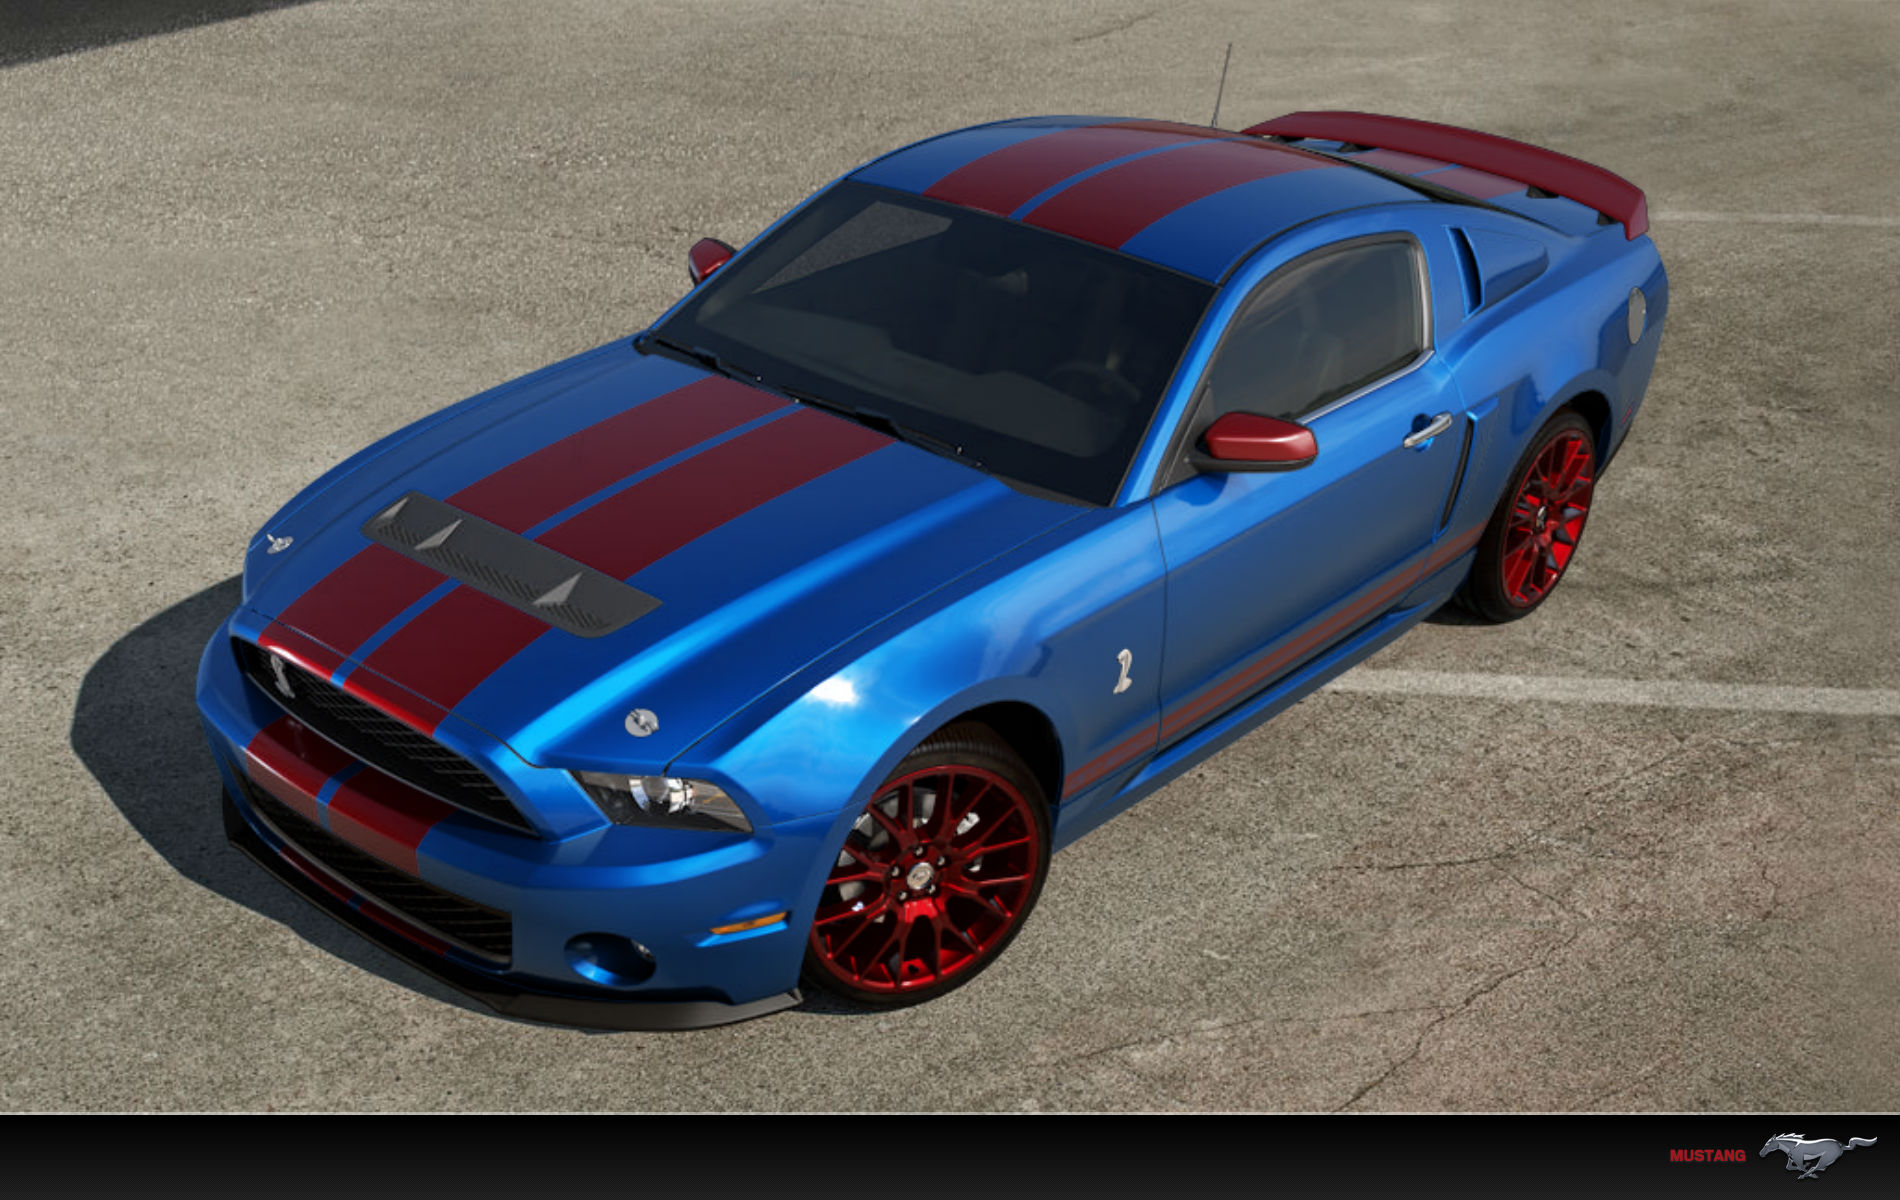  TrabzonSpor Special Edition Gt500 Mustang 2011 1900x1200